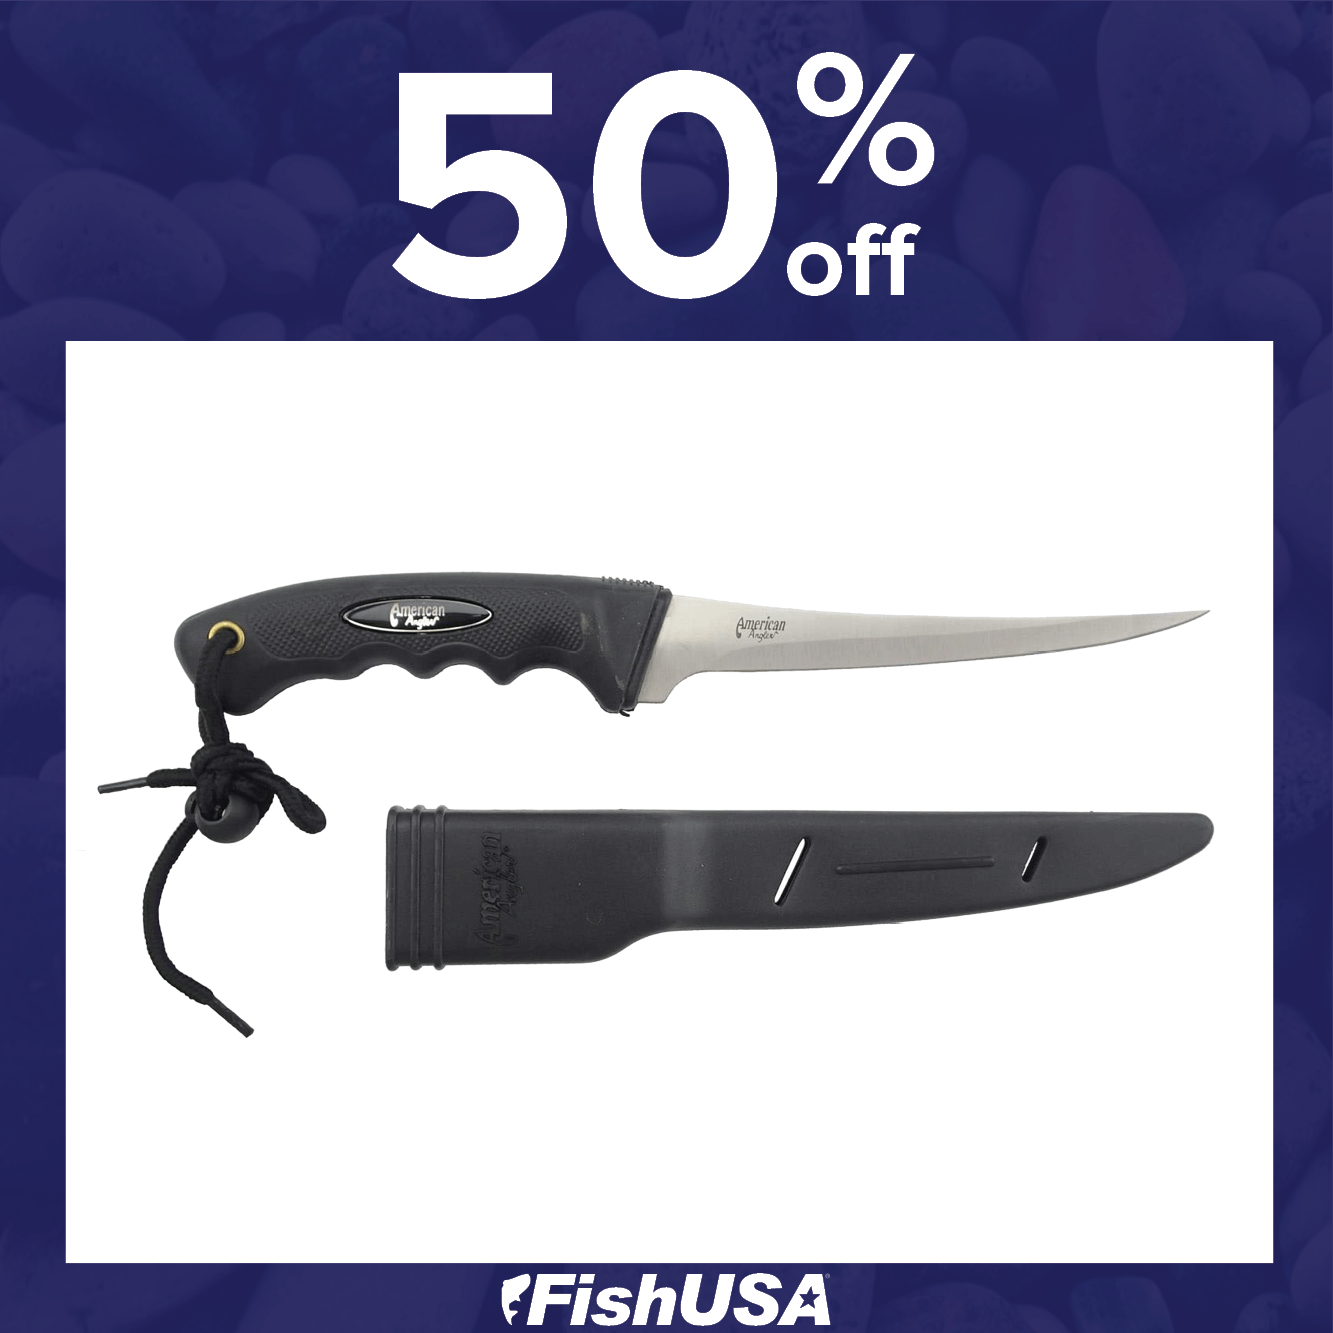 50% off the American Angler 7 In. Soft Grip Fillet Knife